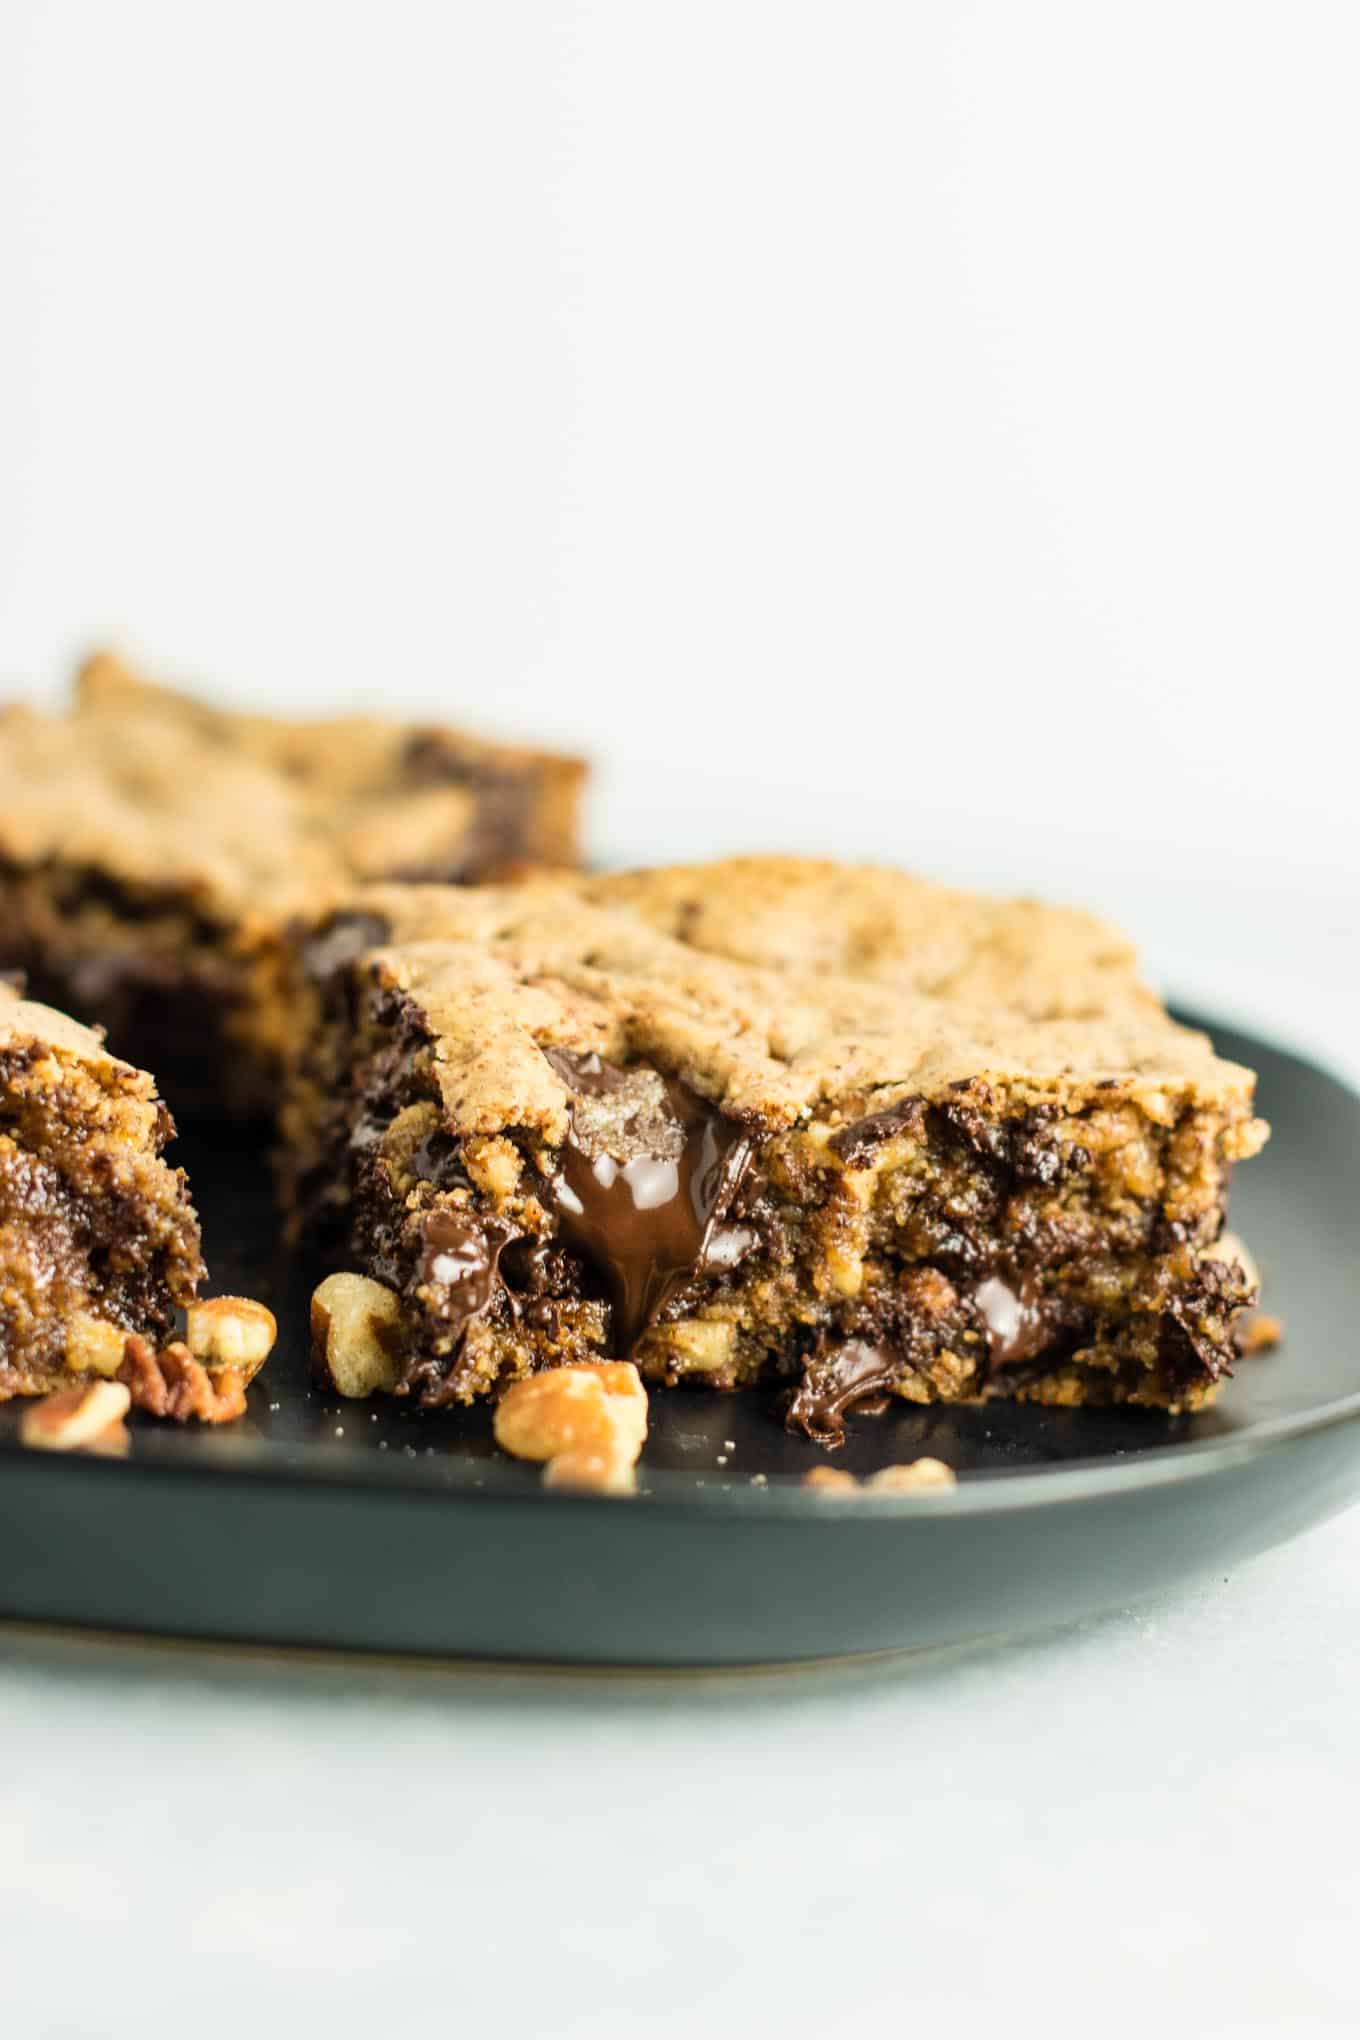 (Death by Chocolate) Dark Chocolate Pecan Cookie Bars recipe – gluten free and dairy free. You won’t believe how good these are! Serve warm with a scoop of vanilla ice cream! #glutenfree #dairyfree #cookiebars #dessert #chocolate